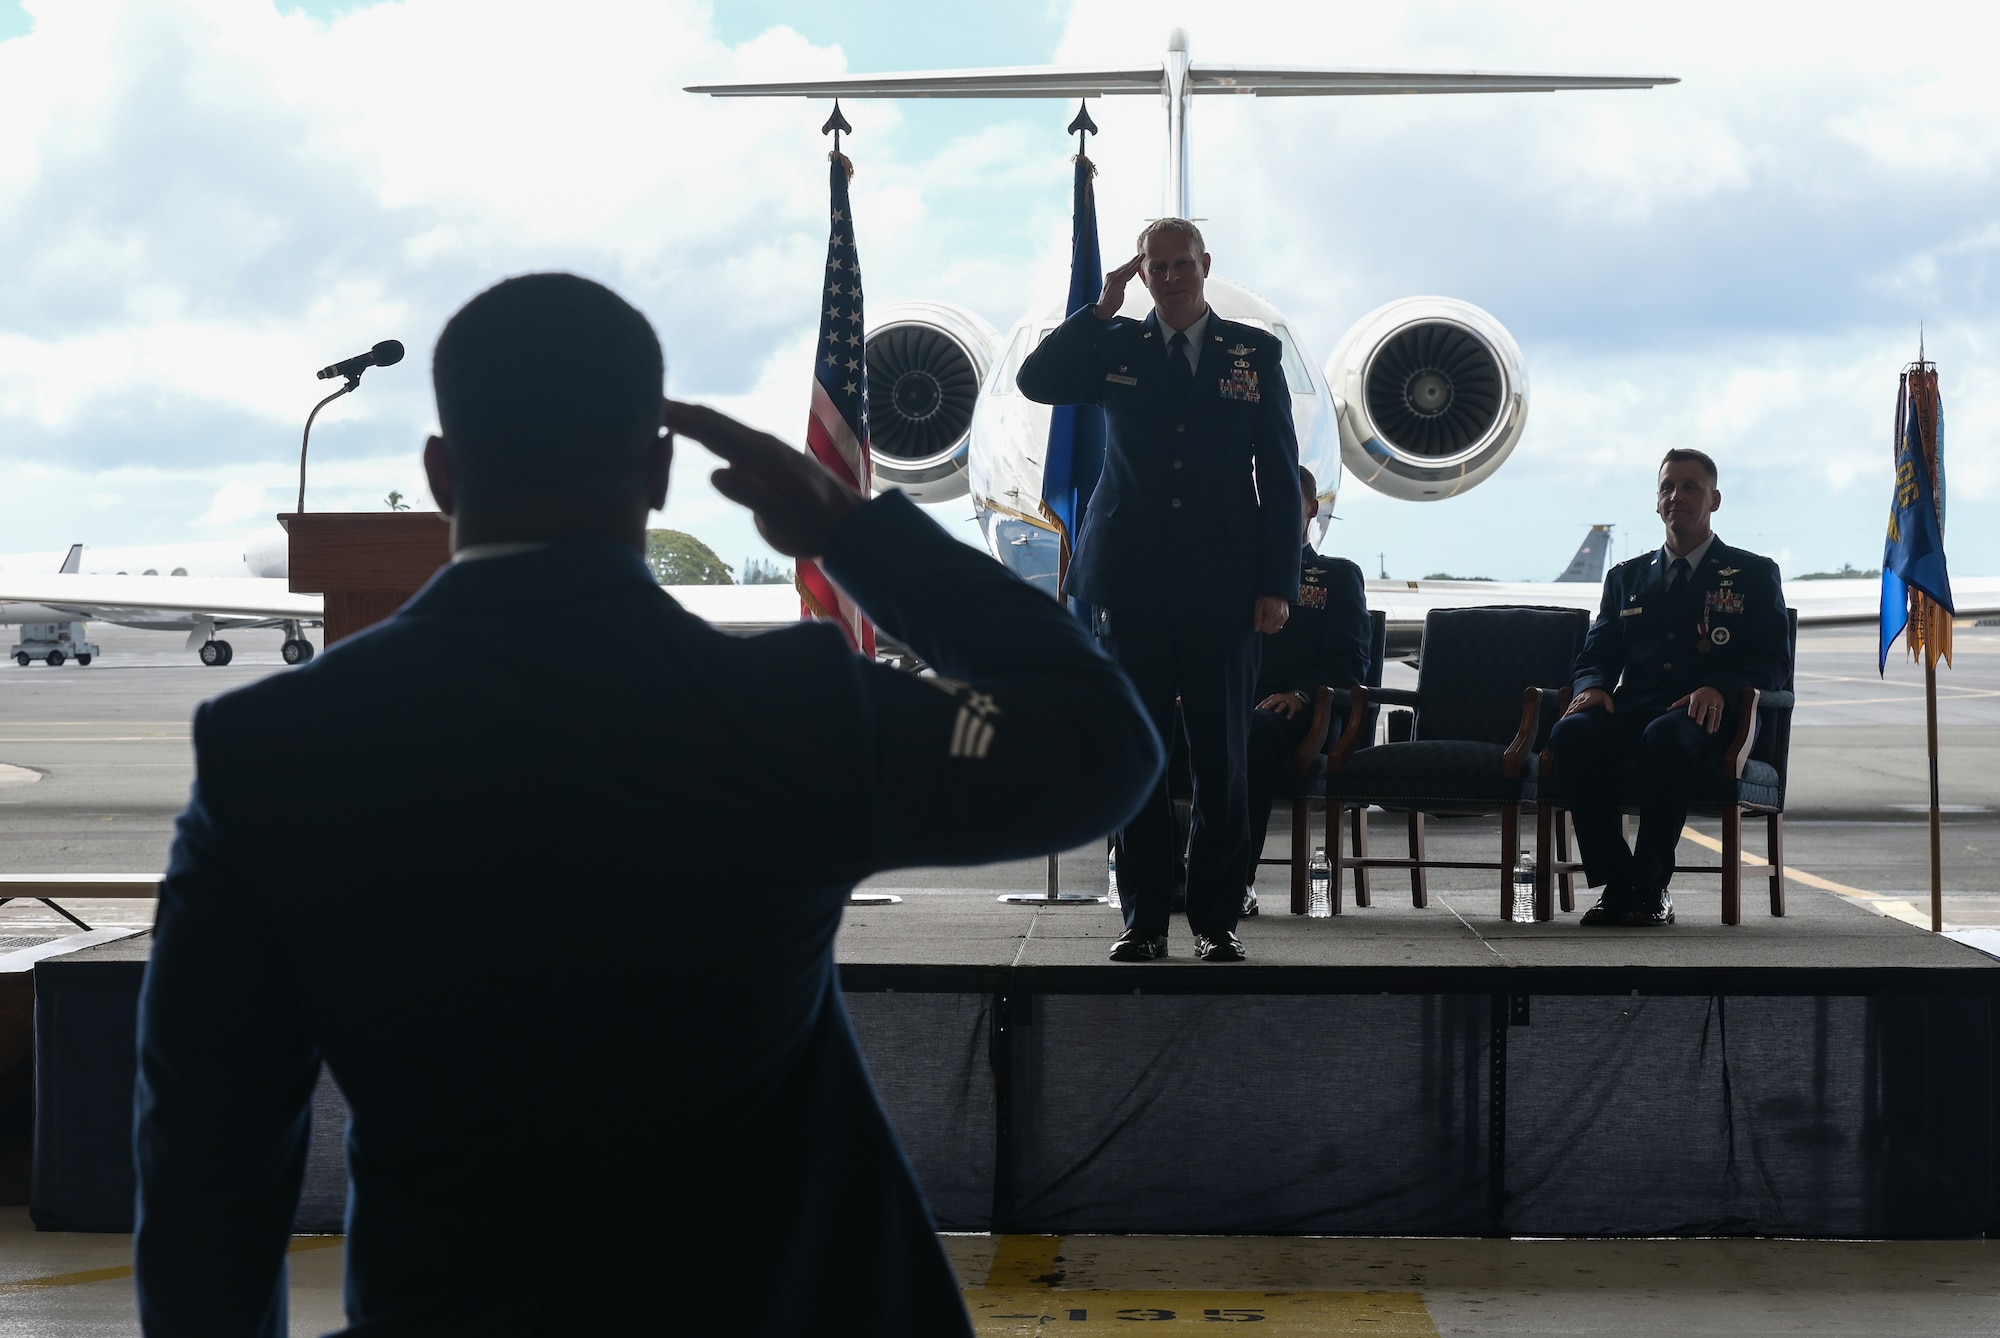 Lt. Col. Daniel Hellinger, 65th Airlift Squadron commander, receives his first salute during a change of command ceremony at Joint Base Pearl Harbor-Hickam, Hawaii, June 24, 2022. Hellinger has been assigned to JBPHH since Oct. 2020, where he served as the 15th Operations Group Director of Staff. (U.S. Air Force photo by Staff Sgt. Alan Ricker)